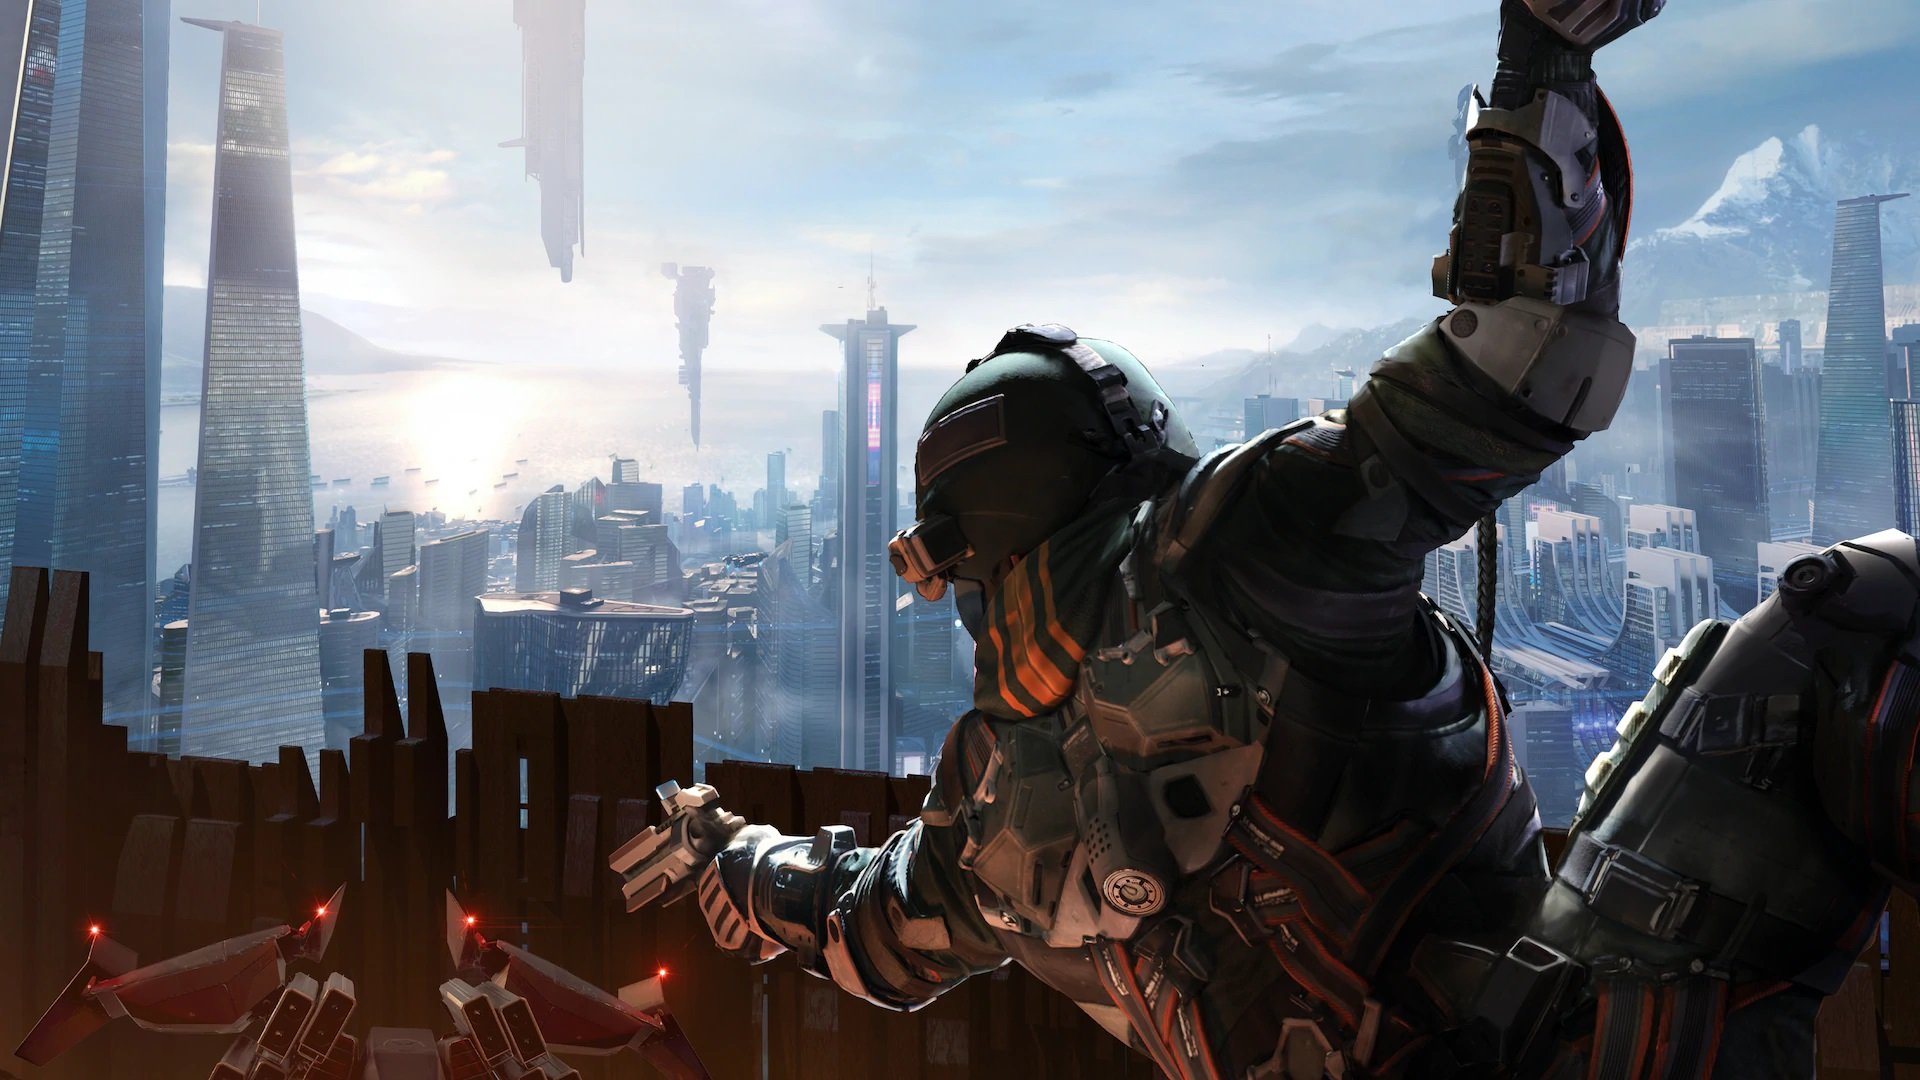 Killzone: Shadow Fall leads PS4's visual charge, but lacks coherency